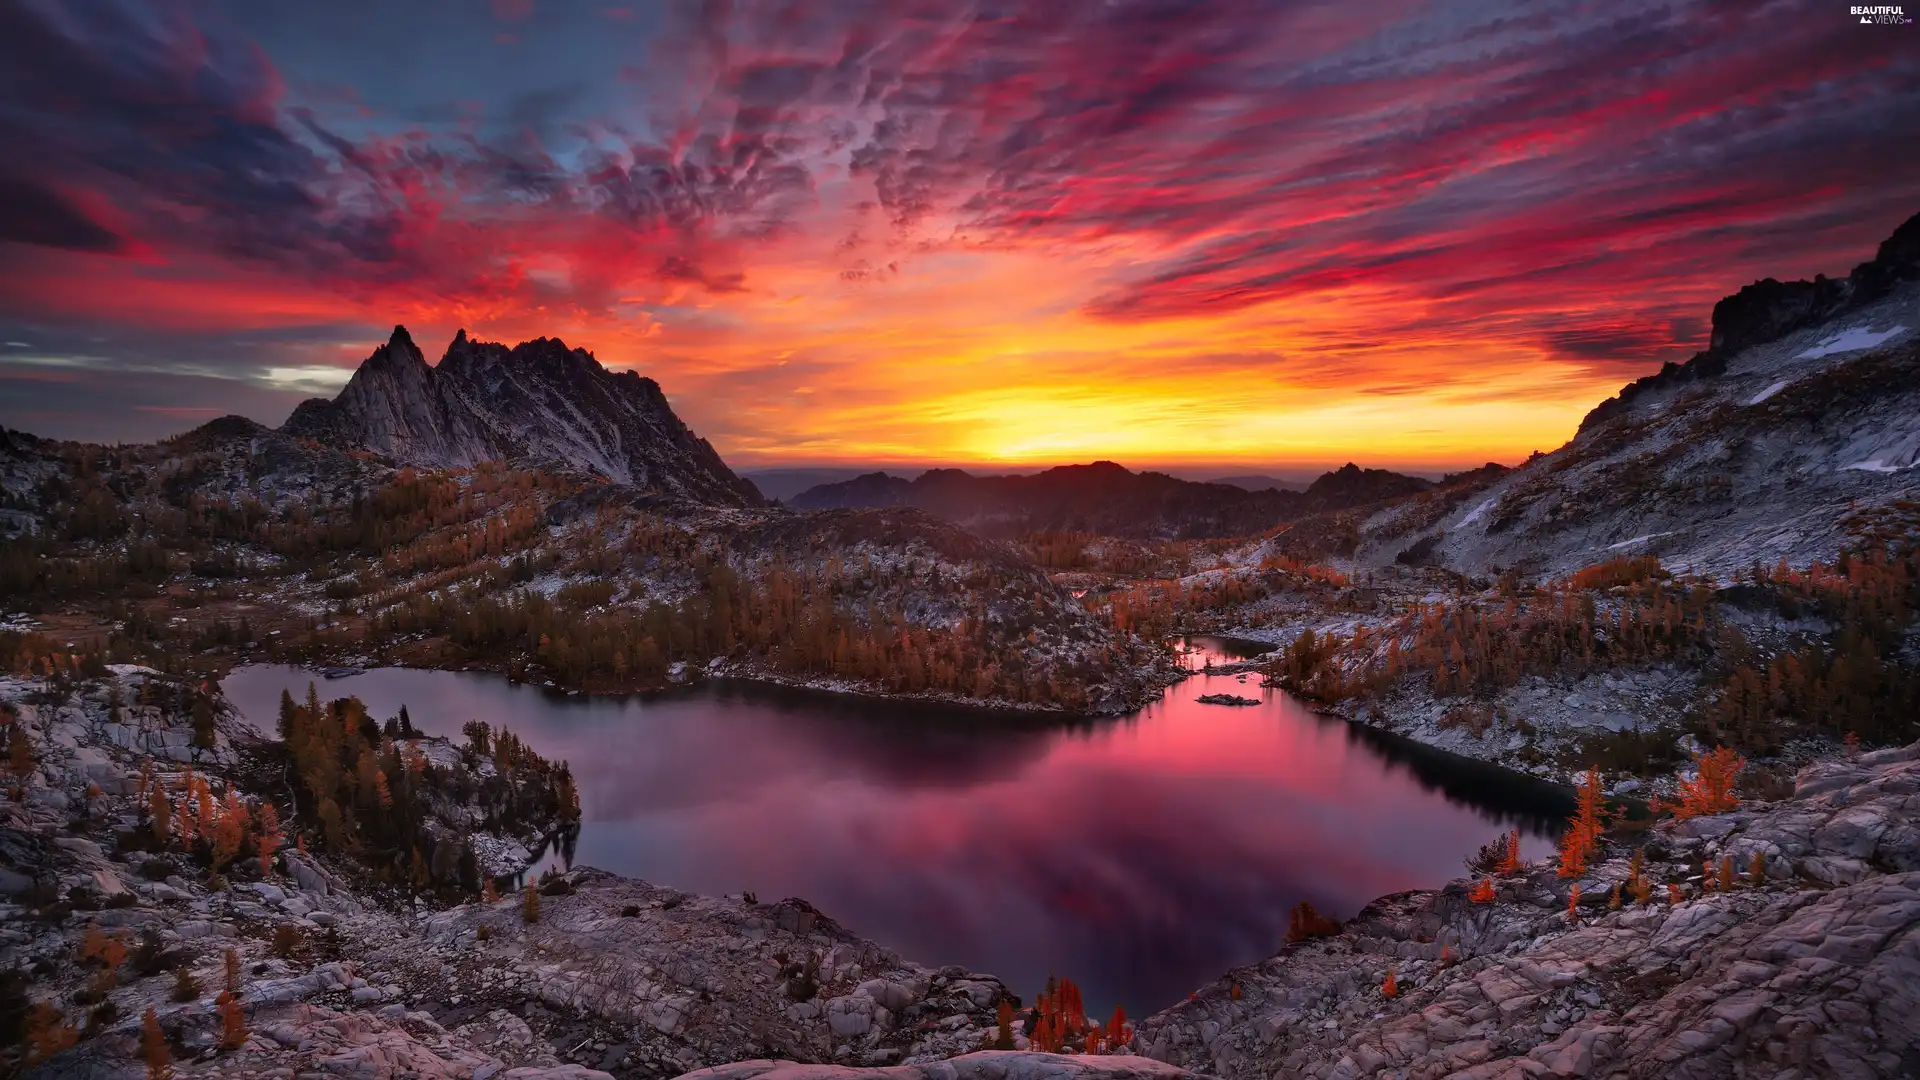 Alpine Lakes Wilderness Nature Reserve, The United States, Mountains, Great Sunsets, Perfection Lake, Washington State